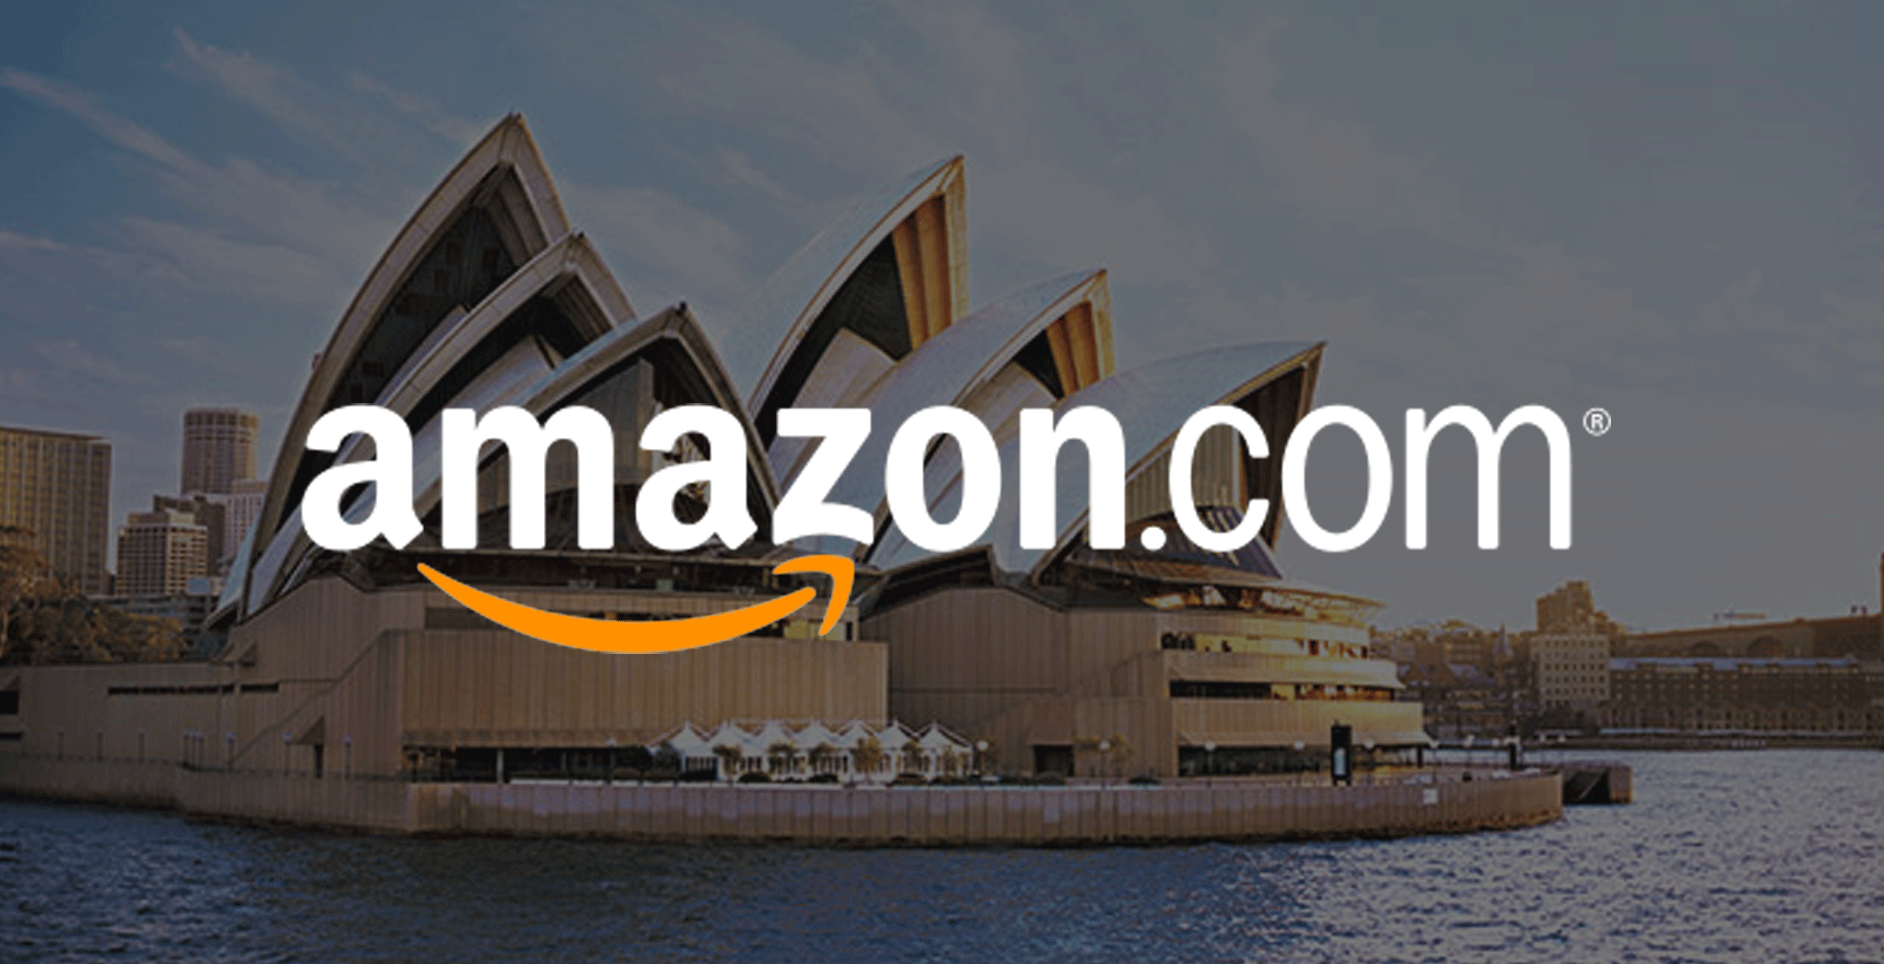 Amazon Australia launch could see Boxing Day online sales rise